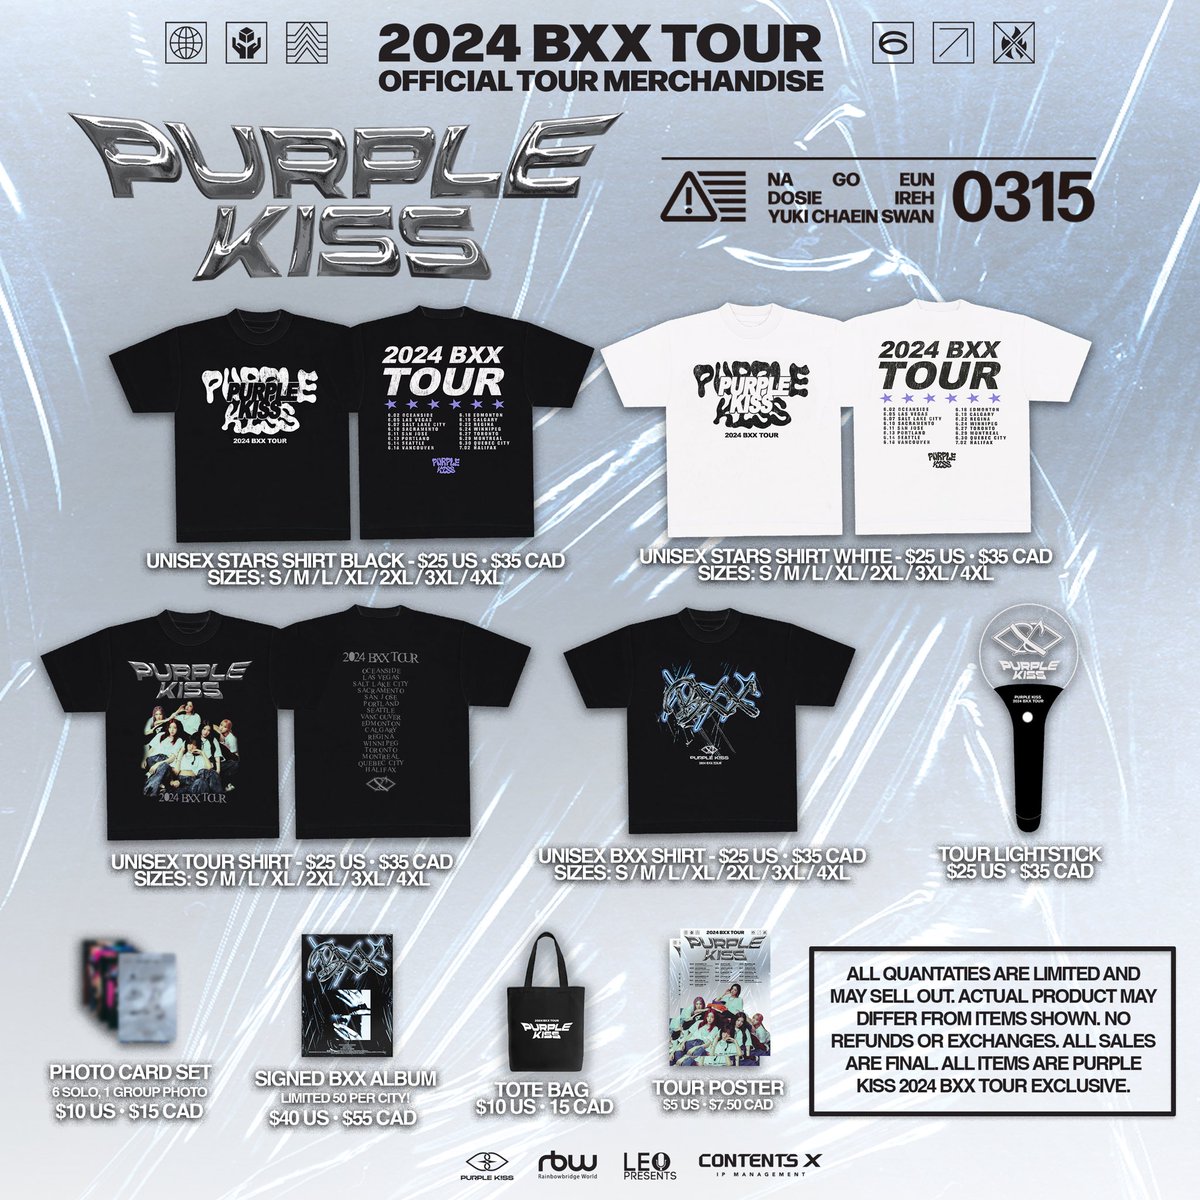 PURPLE KISS 2024 BXX TOUR 😈

[Official Tour Merch] @RBW_PURPLEKISS

These items are exclusive and will only be available for those attending the 2024 BXX TOUR.

#퍼플키스 #PURPLE_KISS 
#PURPLE_KISS_BXX_TOUR